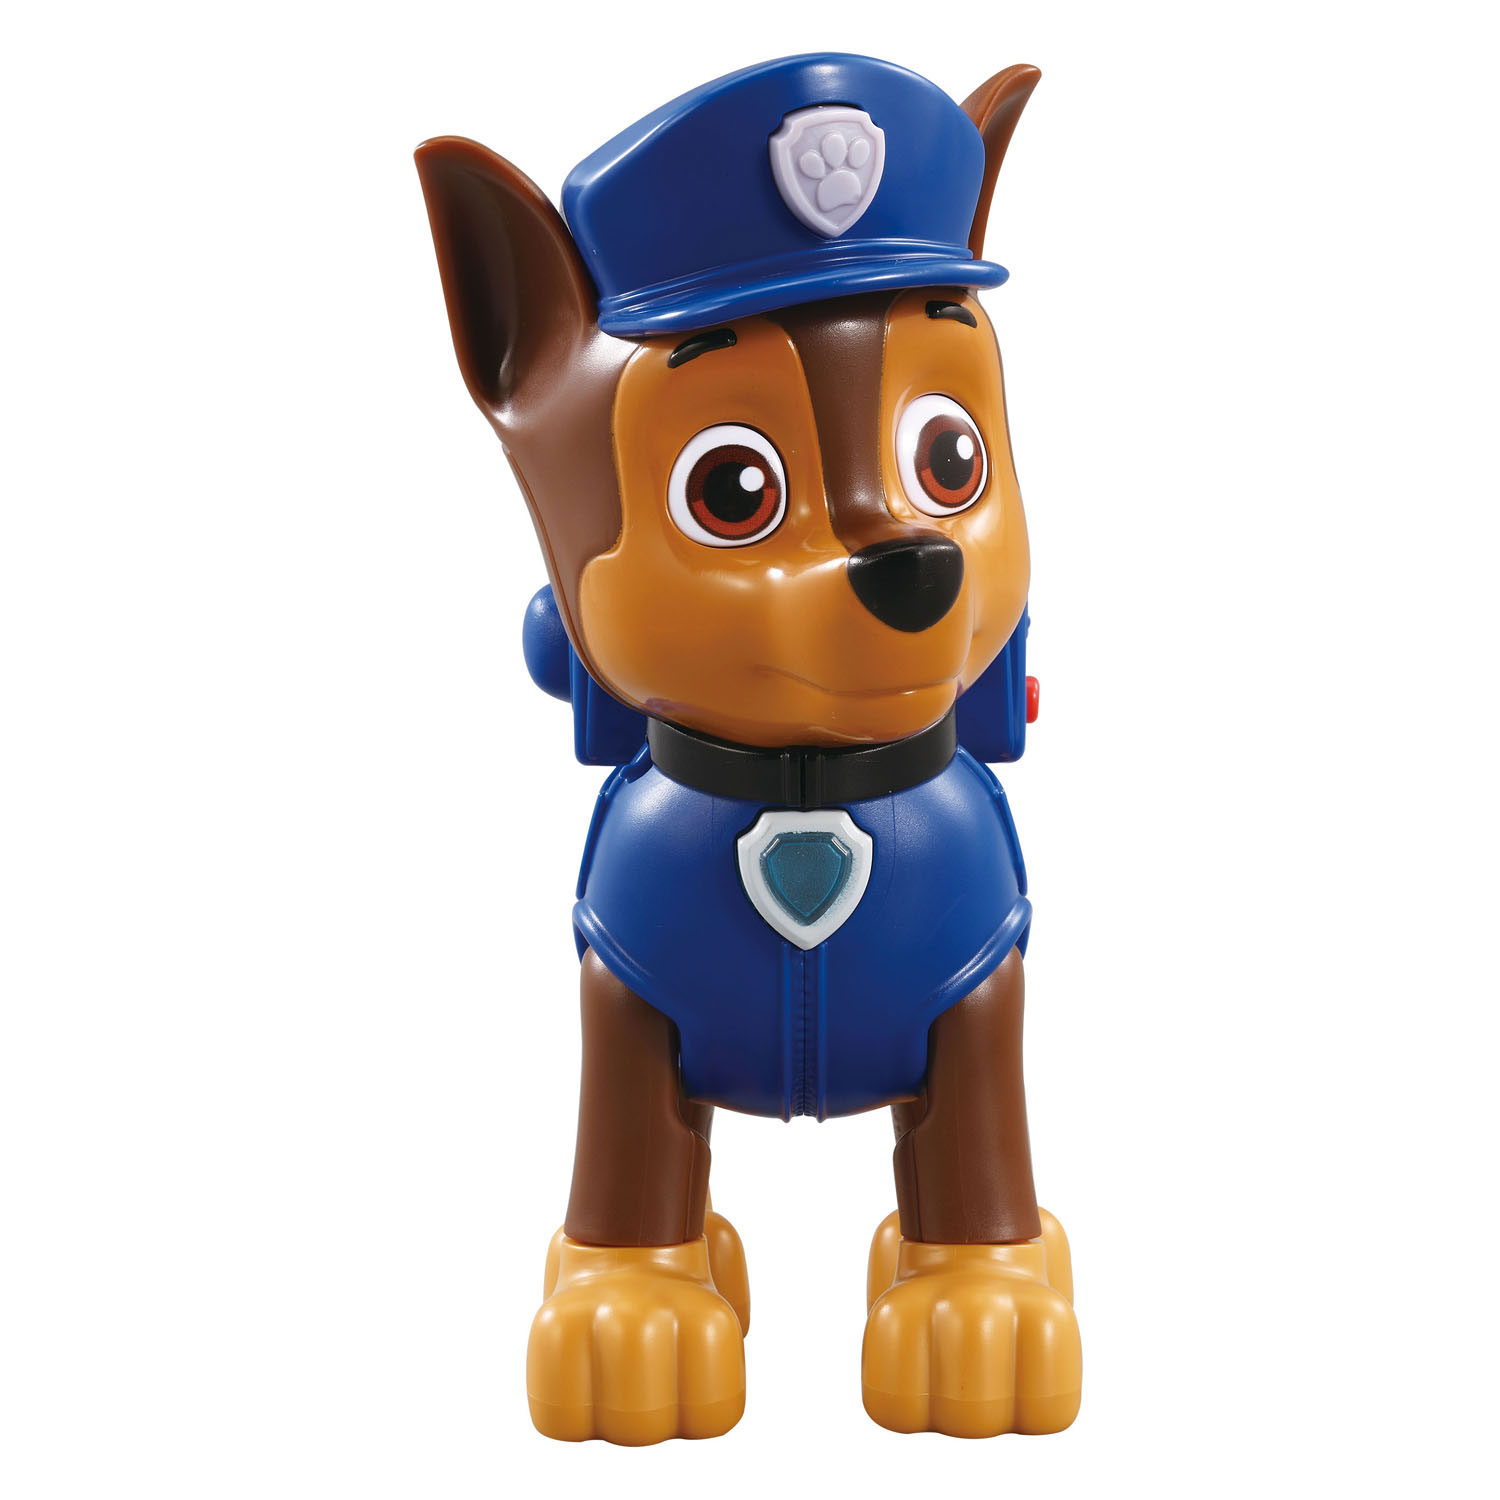 VTech PAW Patrol  - Smartpup Chase Interactief